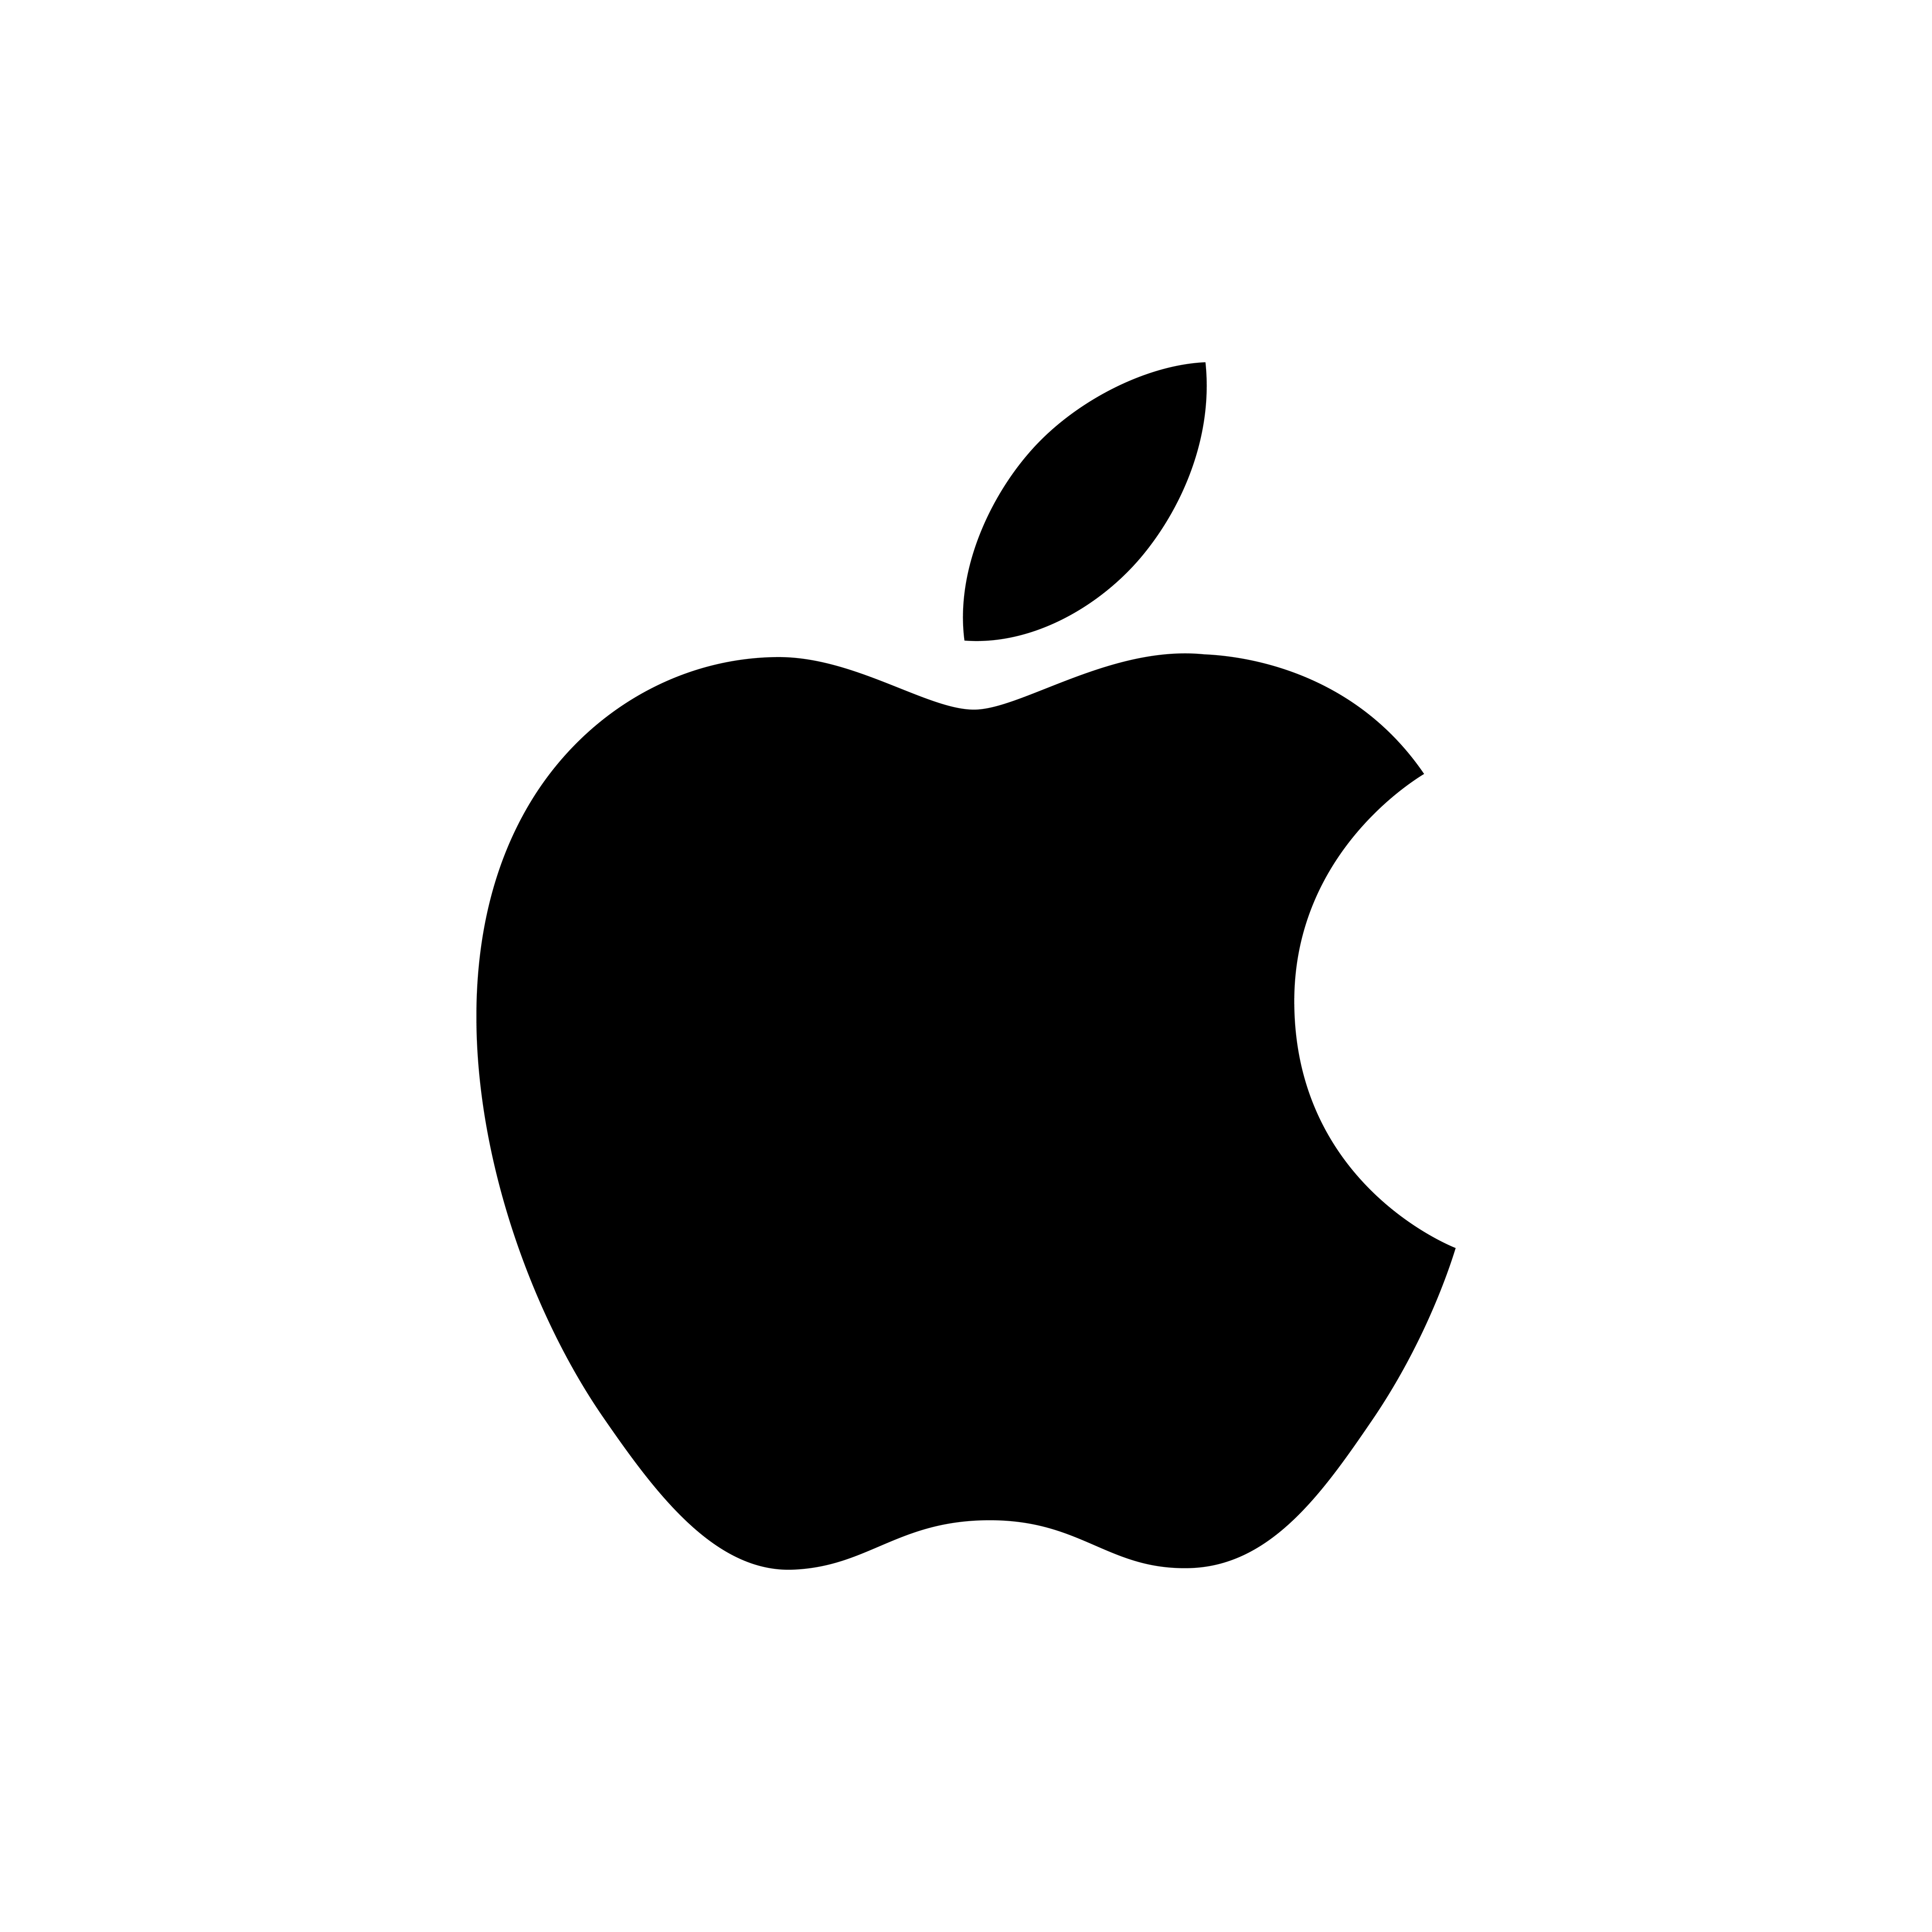 Apple Logo Business iPhone - apple png download - 4096*4096 - Free ...